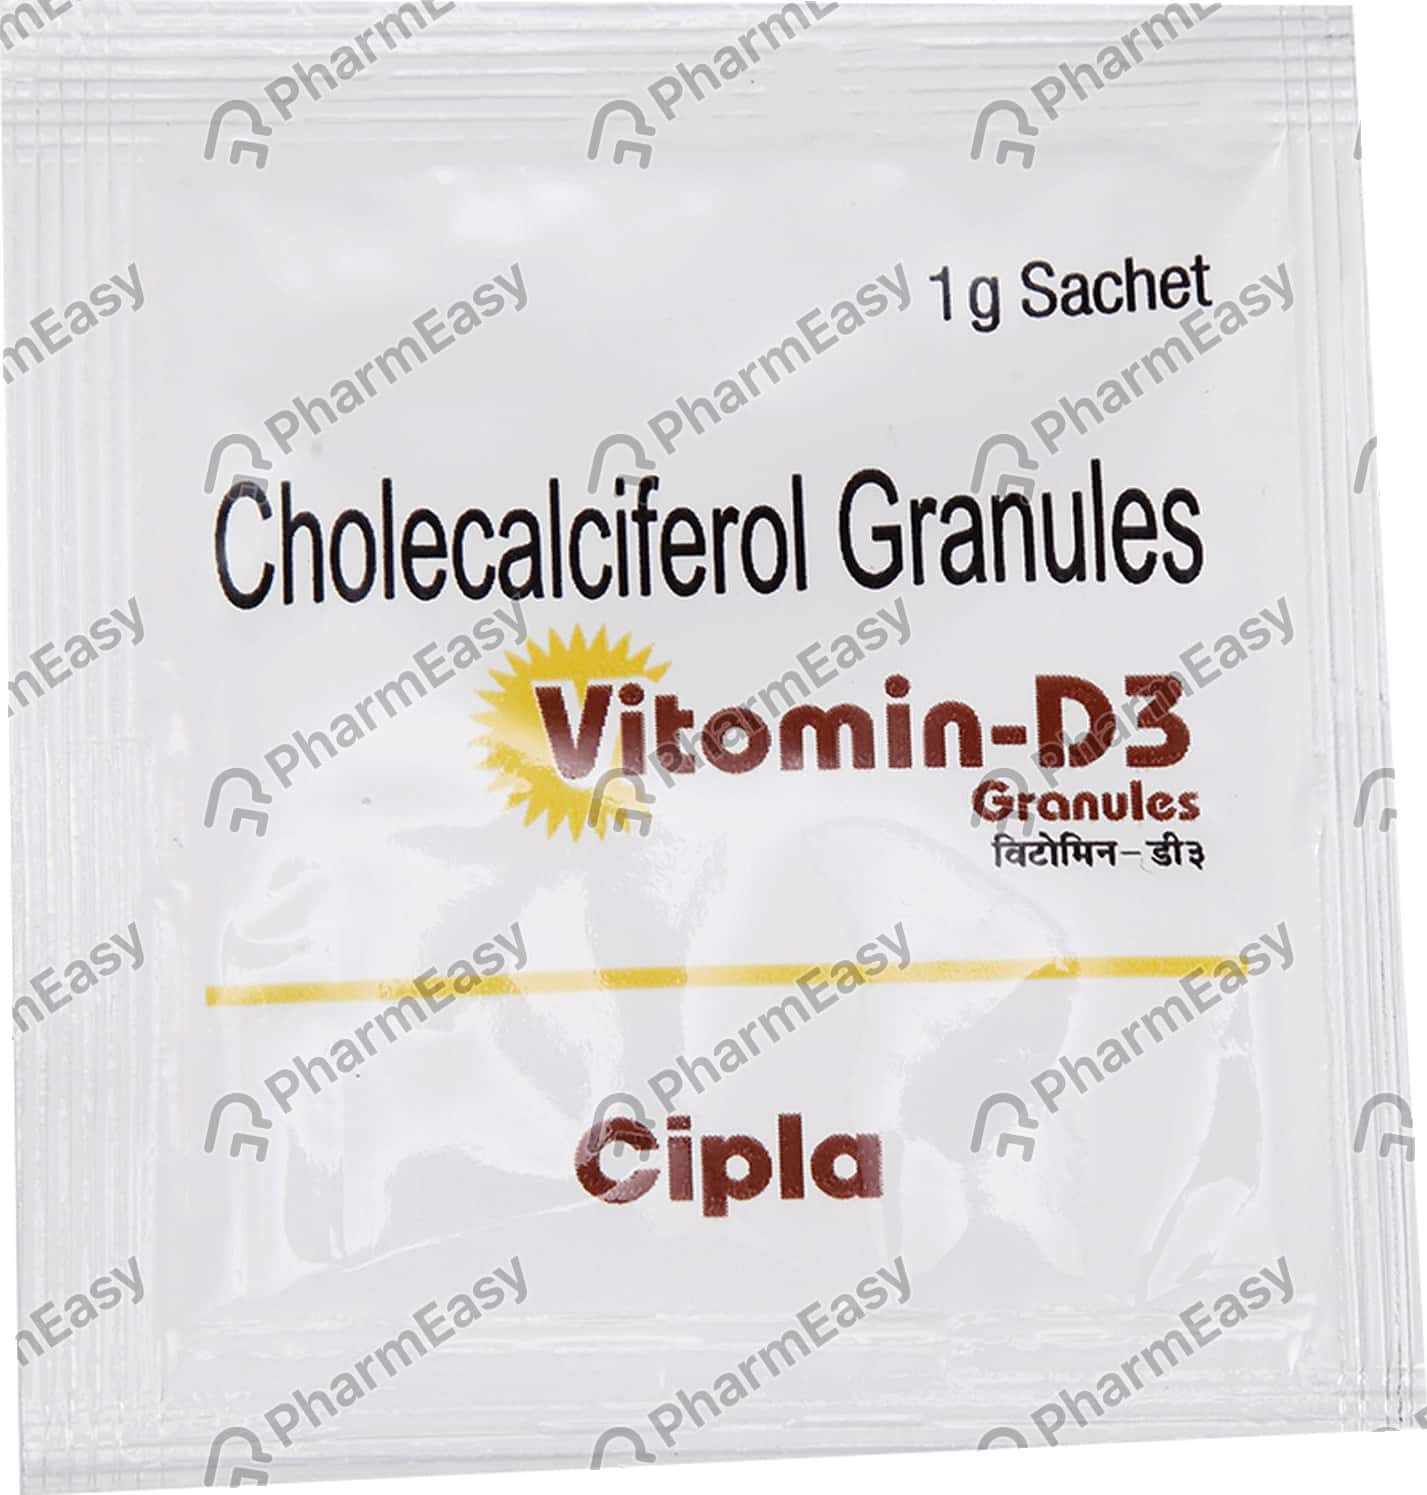 cholecalciferol granules how to use